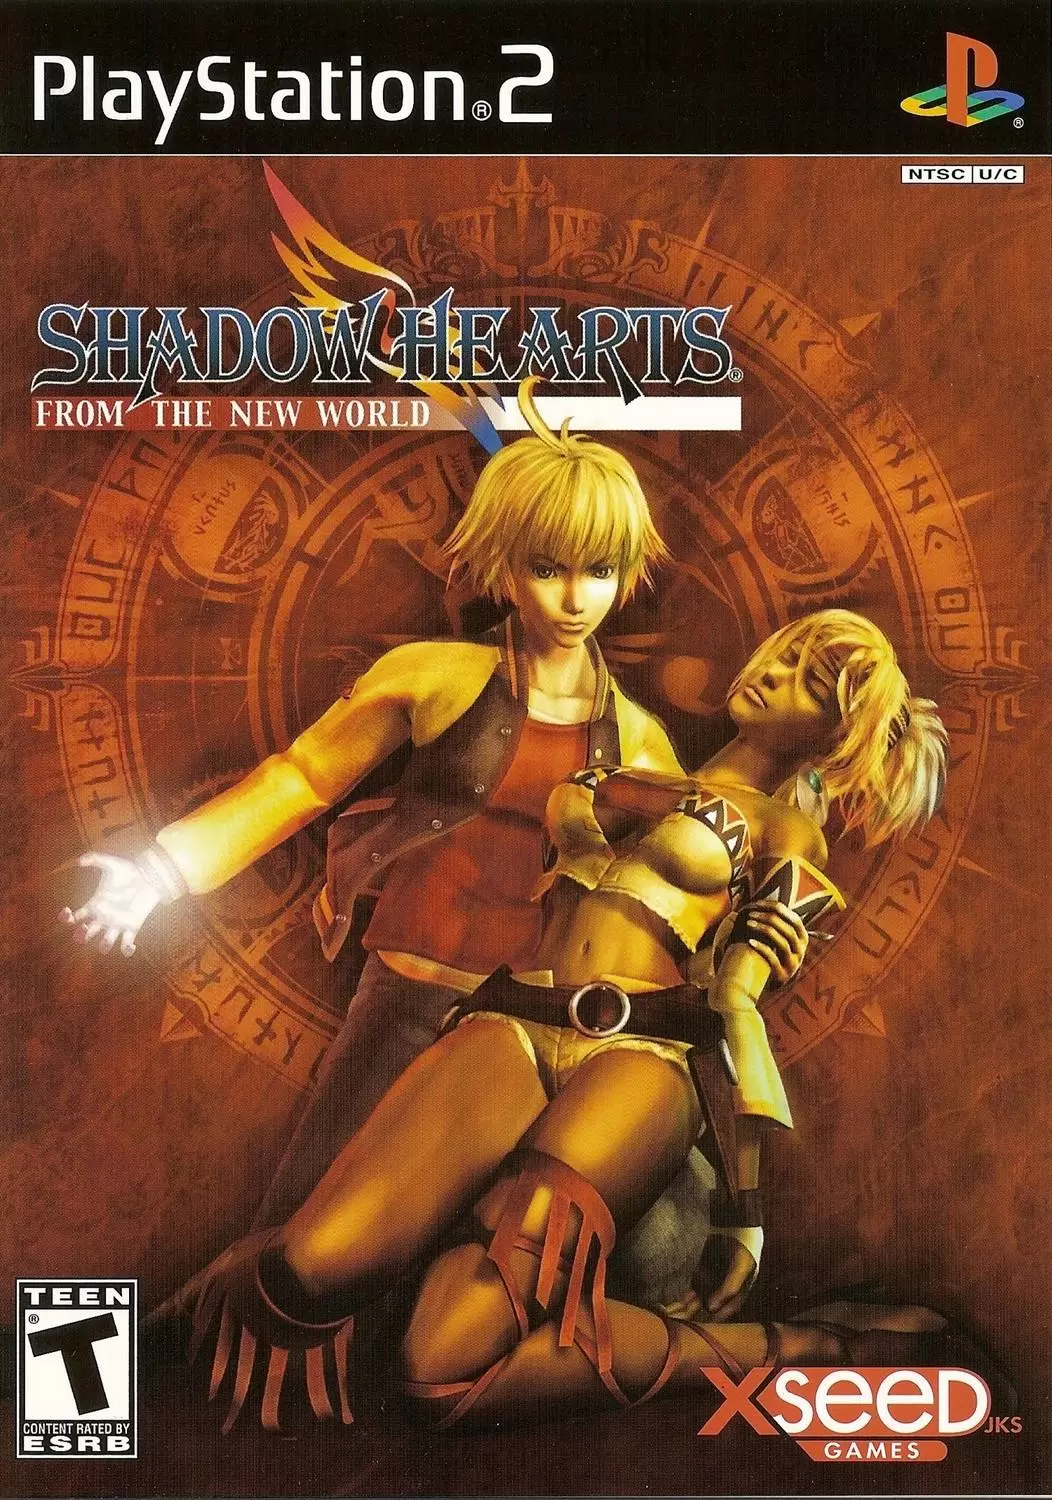 PS2 Games - Shadow Hearts: From the New World